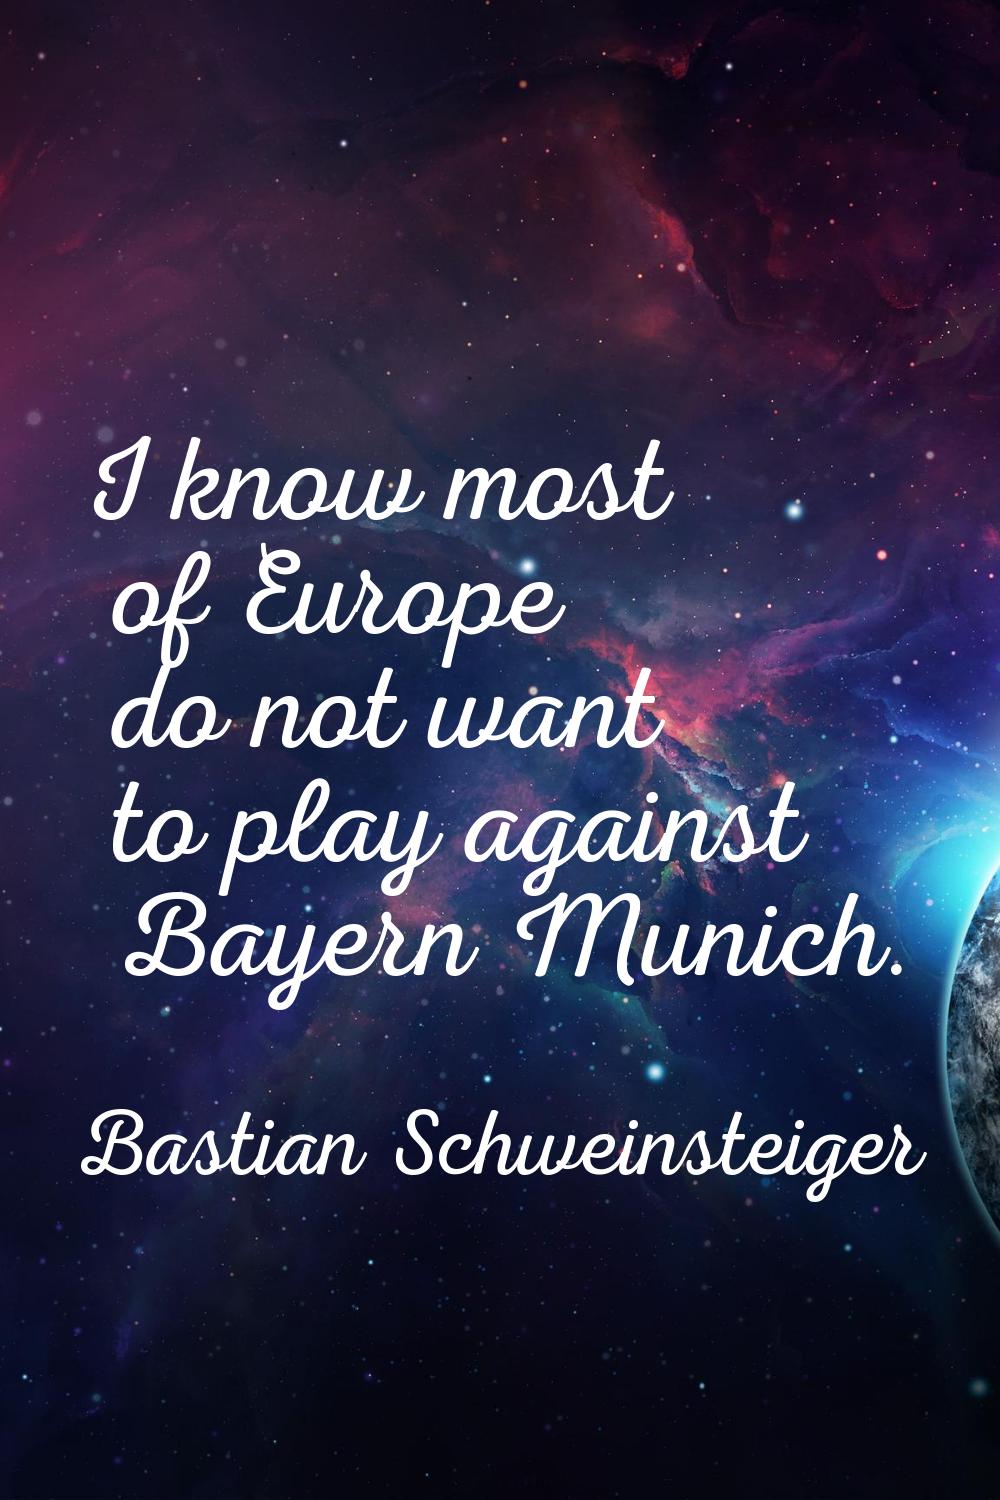 I know most of Europe do not want to play against Bayern Munich.